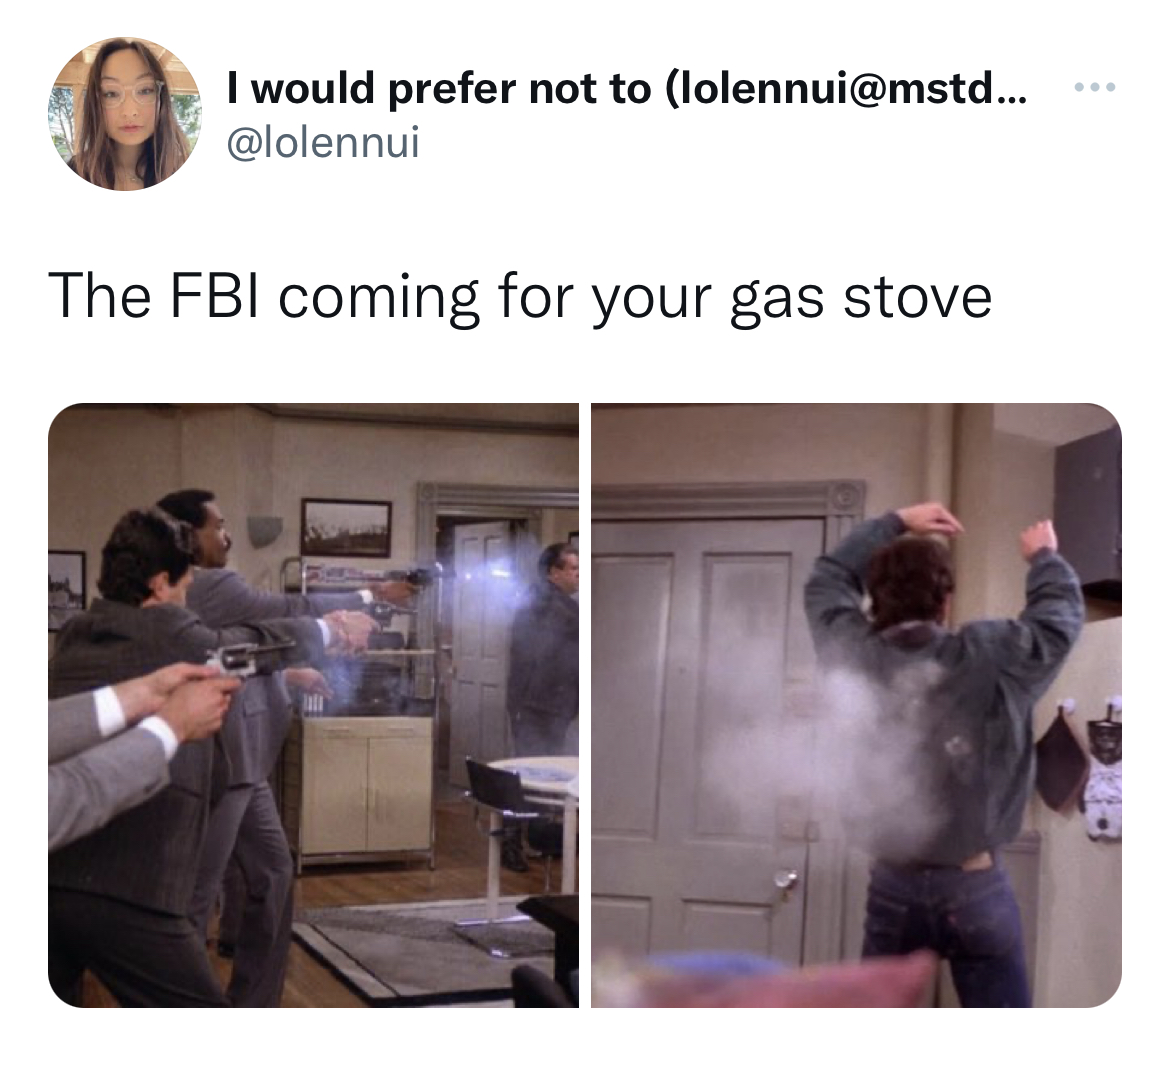 Gas Stove Ban Memes shoulder - I would prefer not to lolennui... The Fbi coming for your gas stove